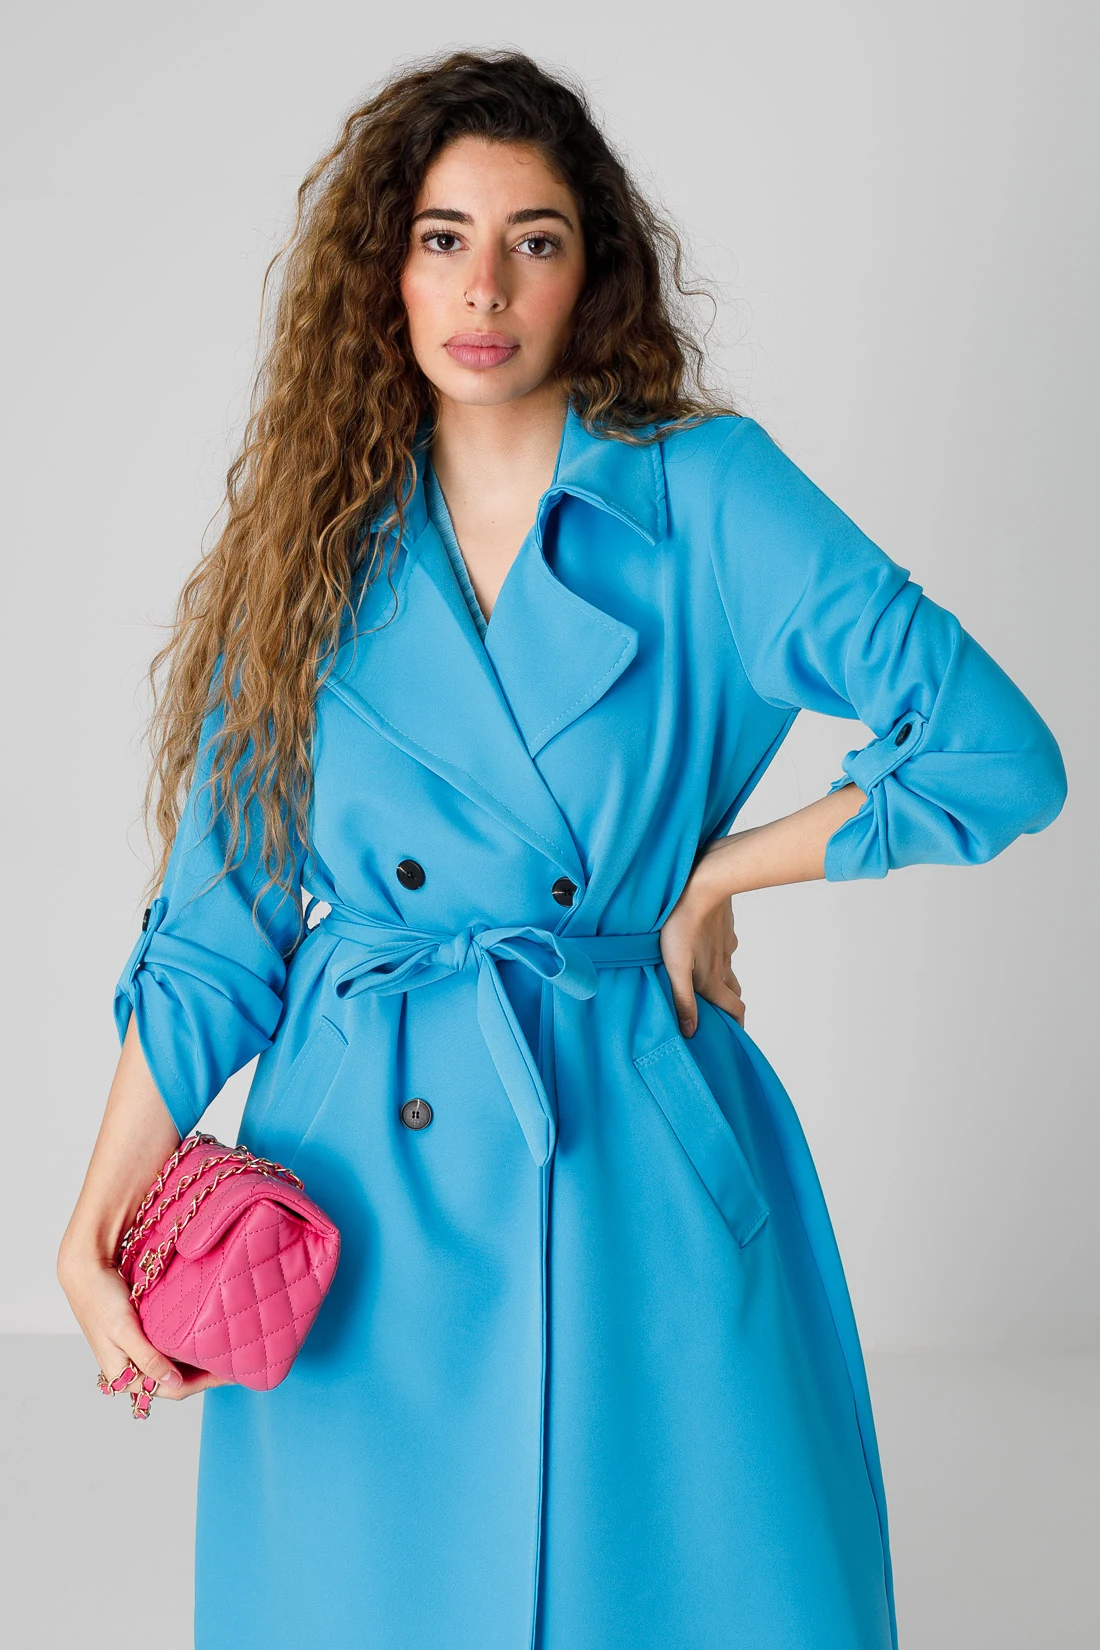 YENDIS TRENCH - BLUE